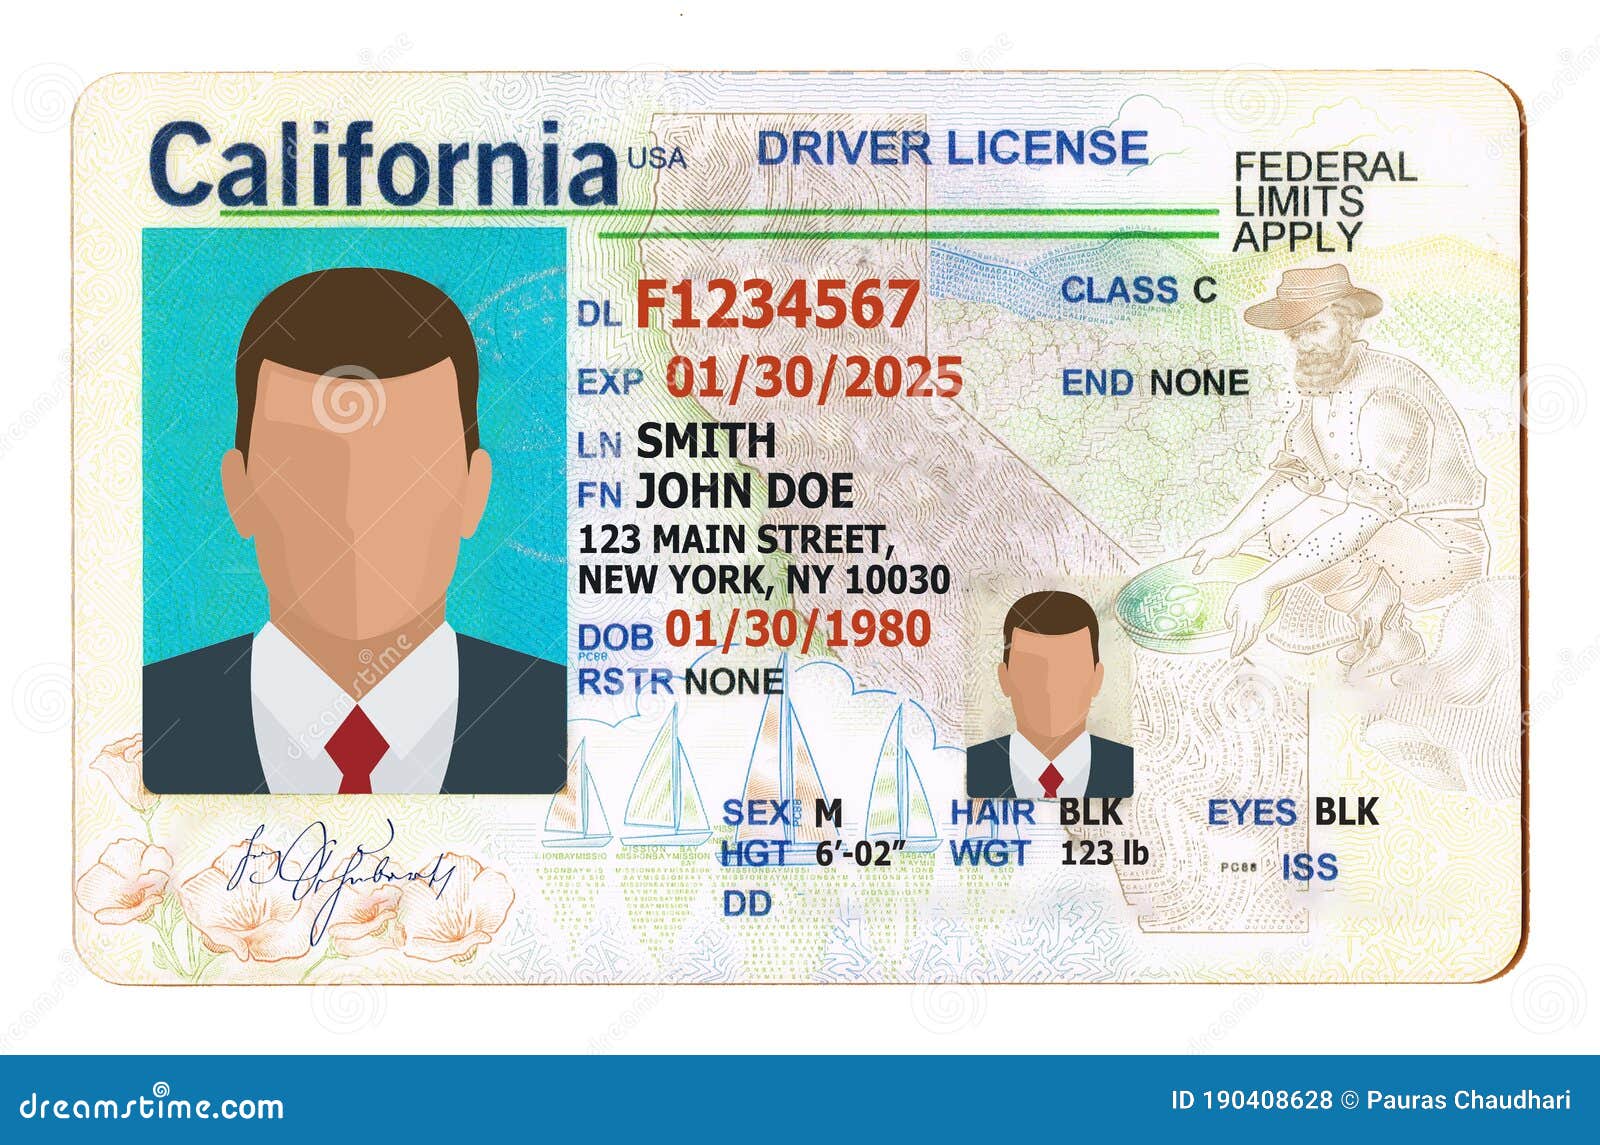 california driver license filled with generic info